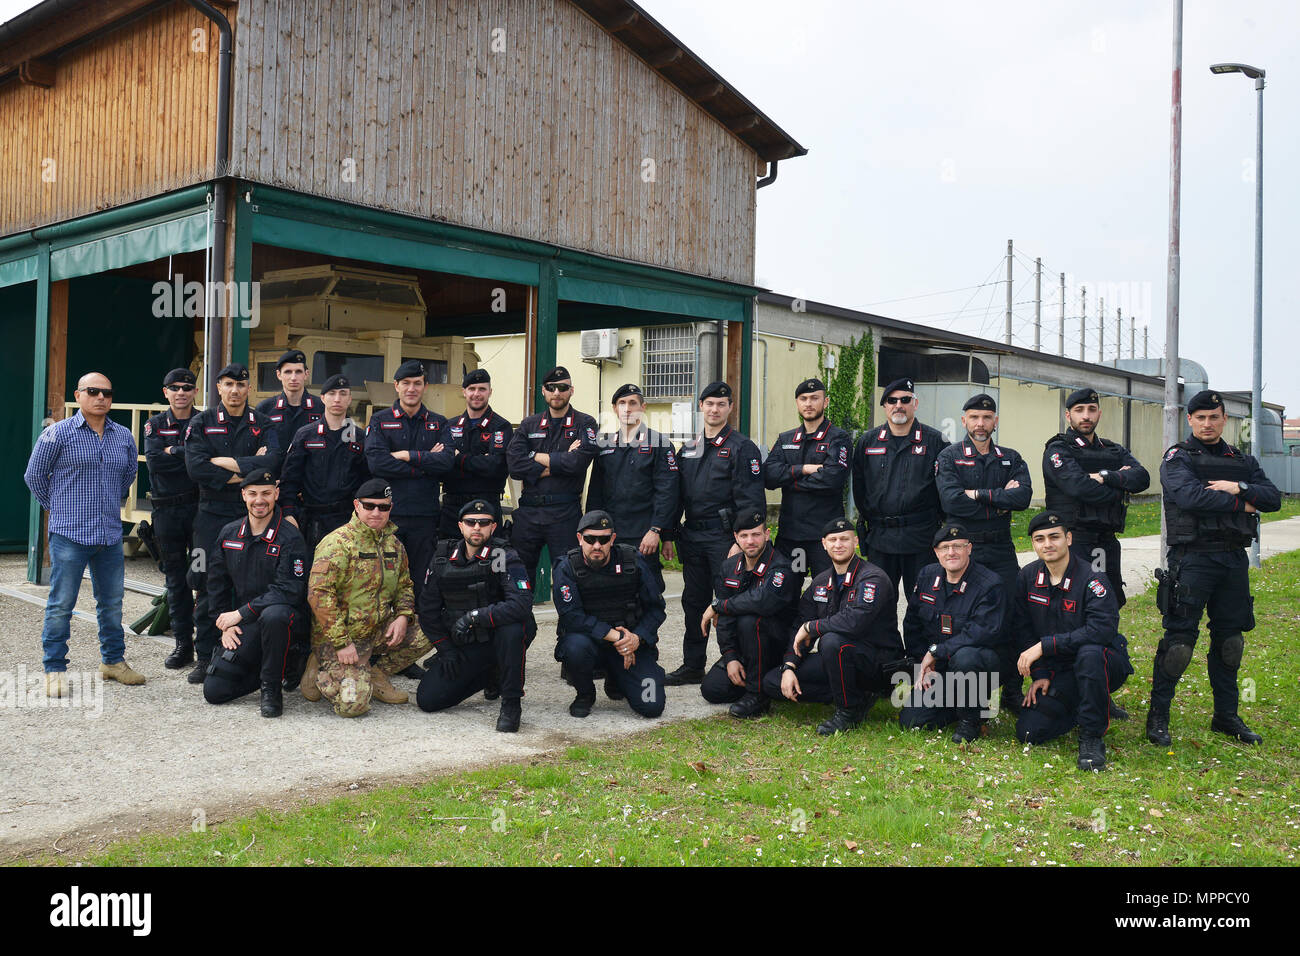 Italian Carabinieri of the 7th Regiment Carabinieri “Laives” Bolzano and 13th Regiment Carabinieri “Friuli Venezia Giulia” Gorizia, pose for a group photo, during the training at Caserma Ederle Vicenza, Italy, April 6, 2017. Carabinieri use U.S. Army RTSD South equipment to enhance the bilateral relations and to expand levels of cooperation and the capacity of the personnel involved in joint operations. (U.S. Army photo by Visual Information Specialist Paolo Bovo/released) Stock Photo